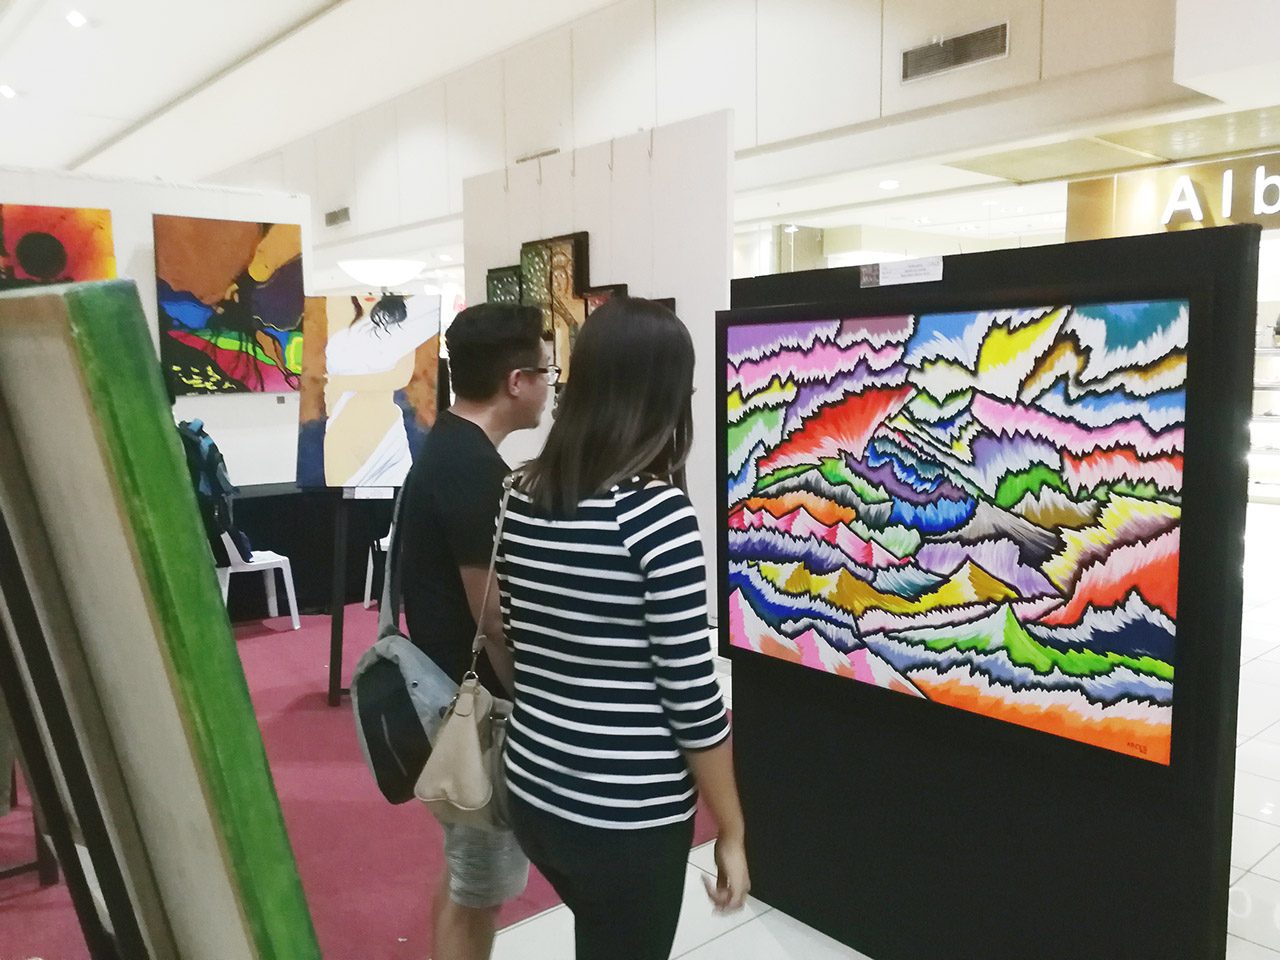 Cagayan de Oro exhibit sheds light on the marginalized